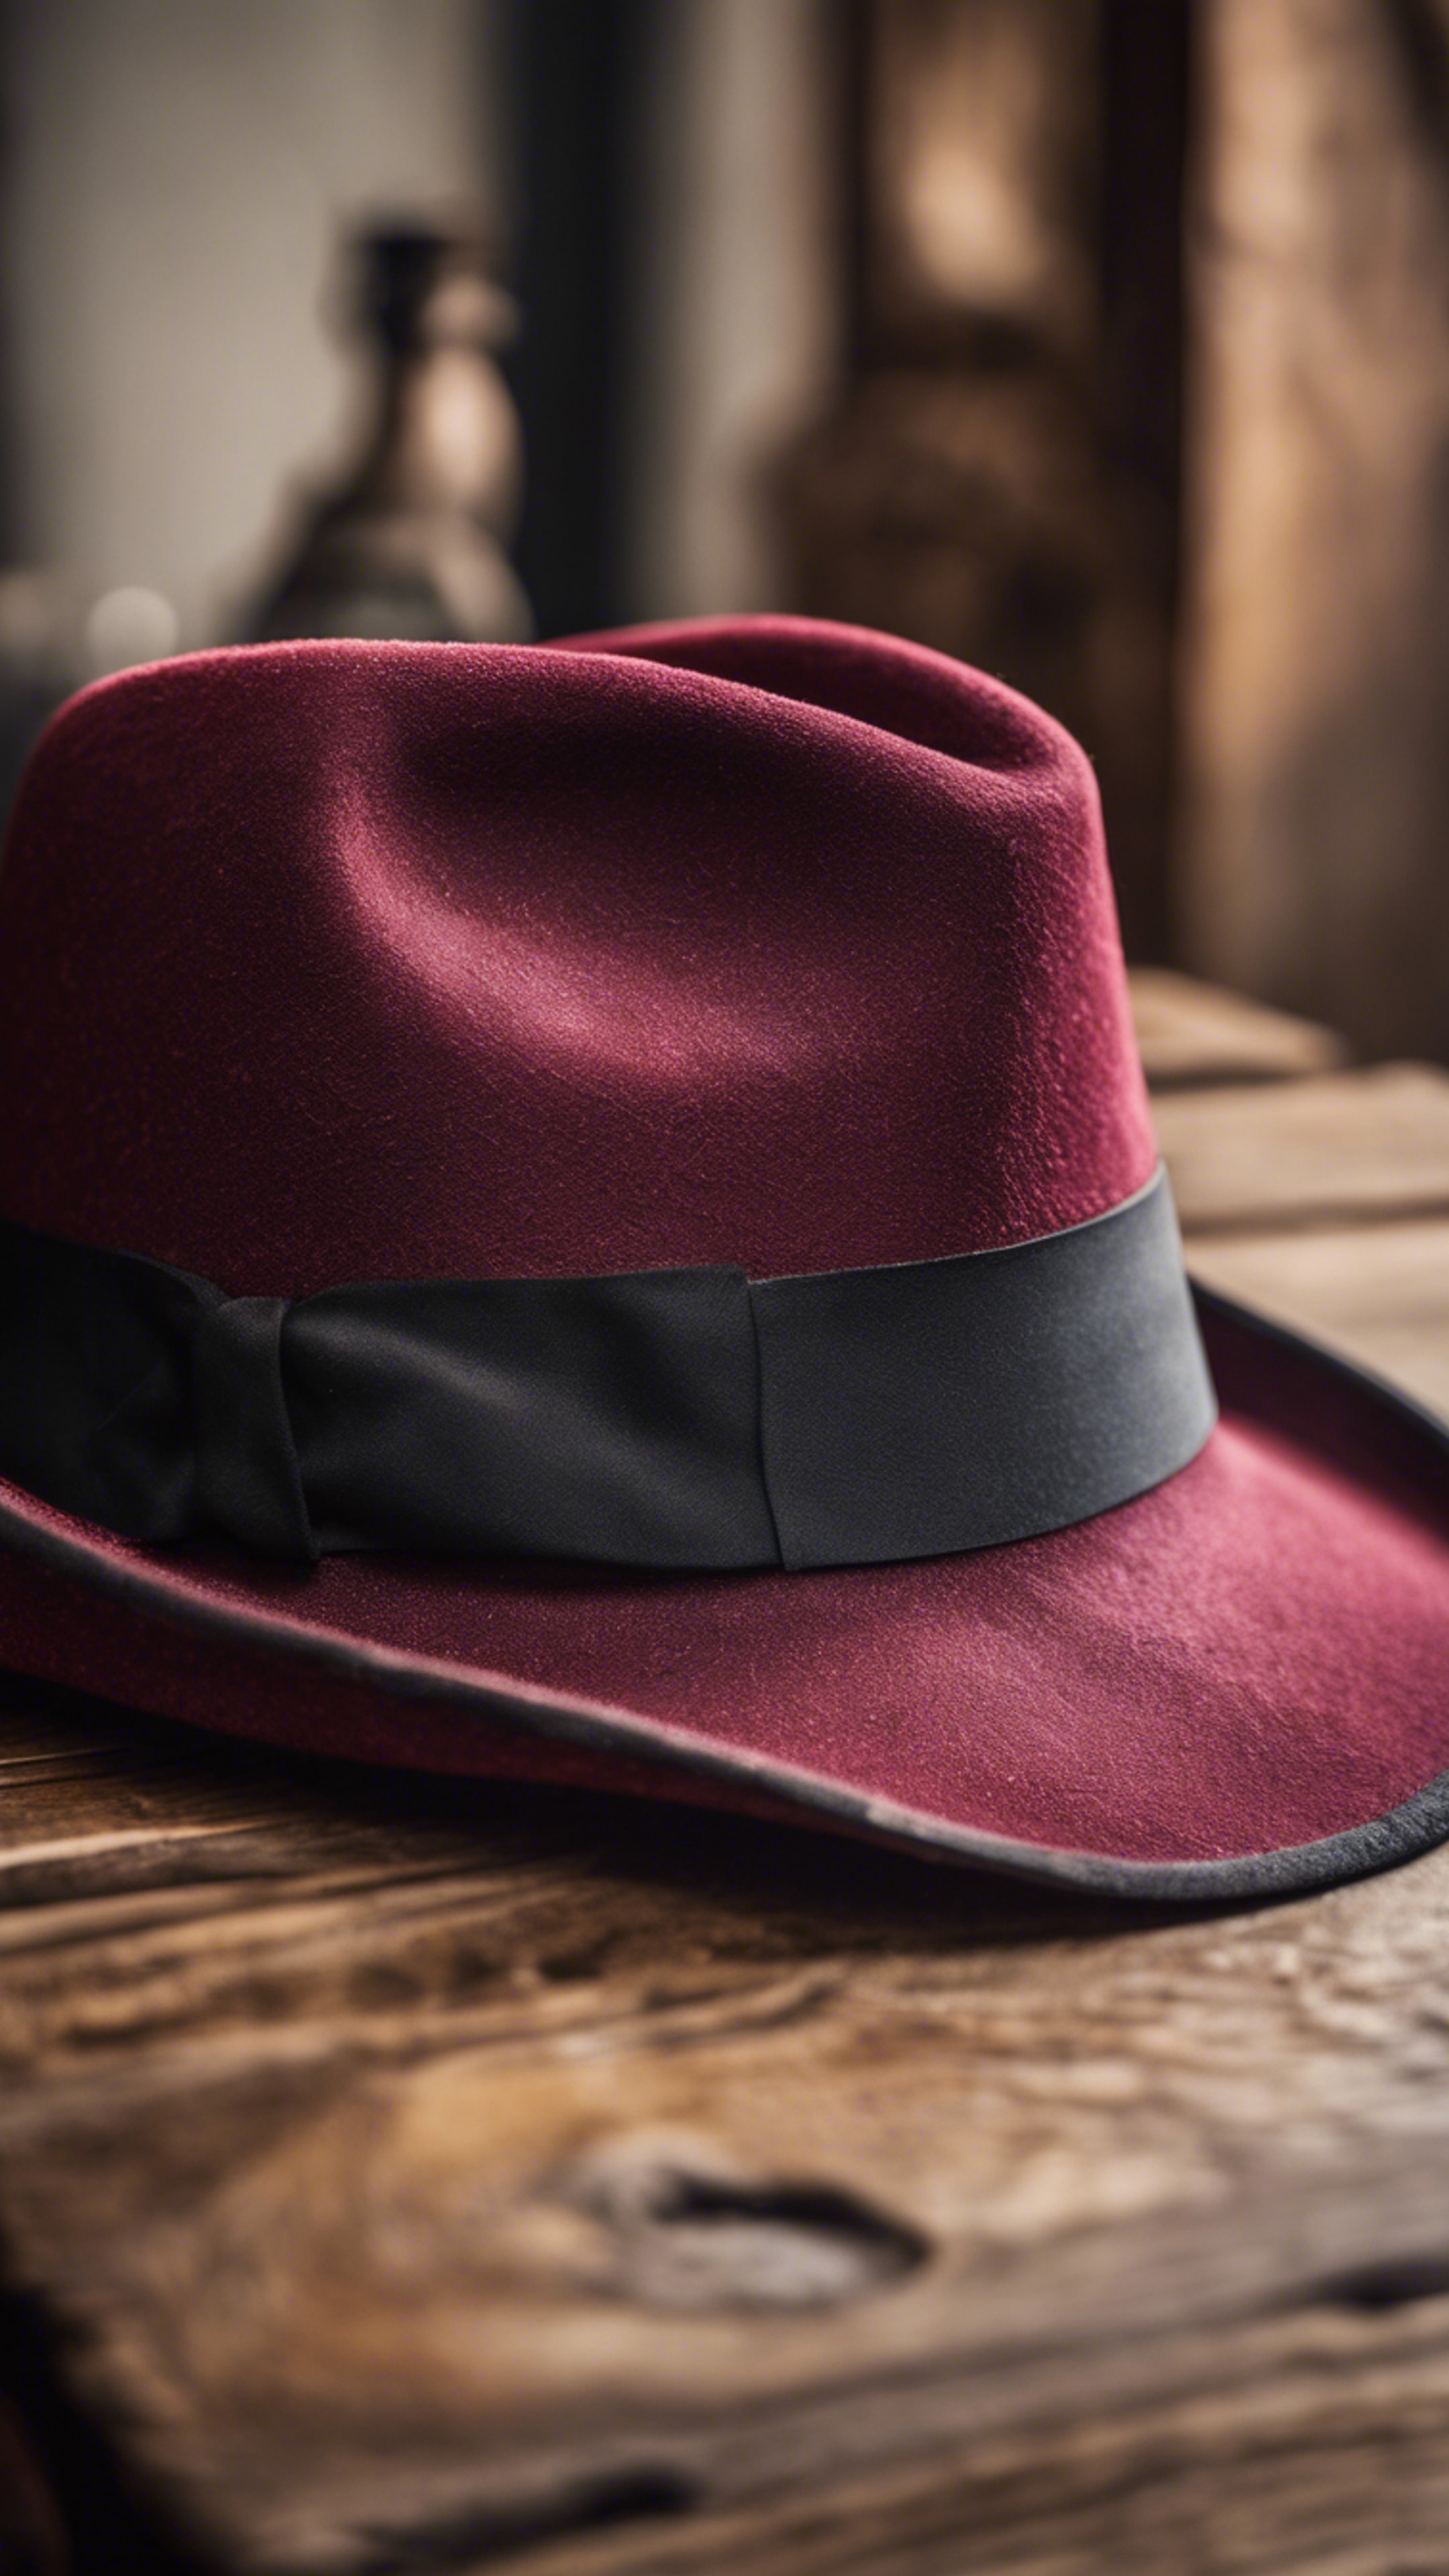 A cool maroon fedora hat positioned on an antique wooden table. Tapeet[05b3f475f93c4ade83cc]